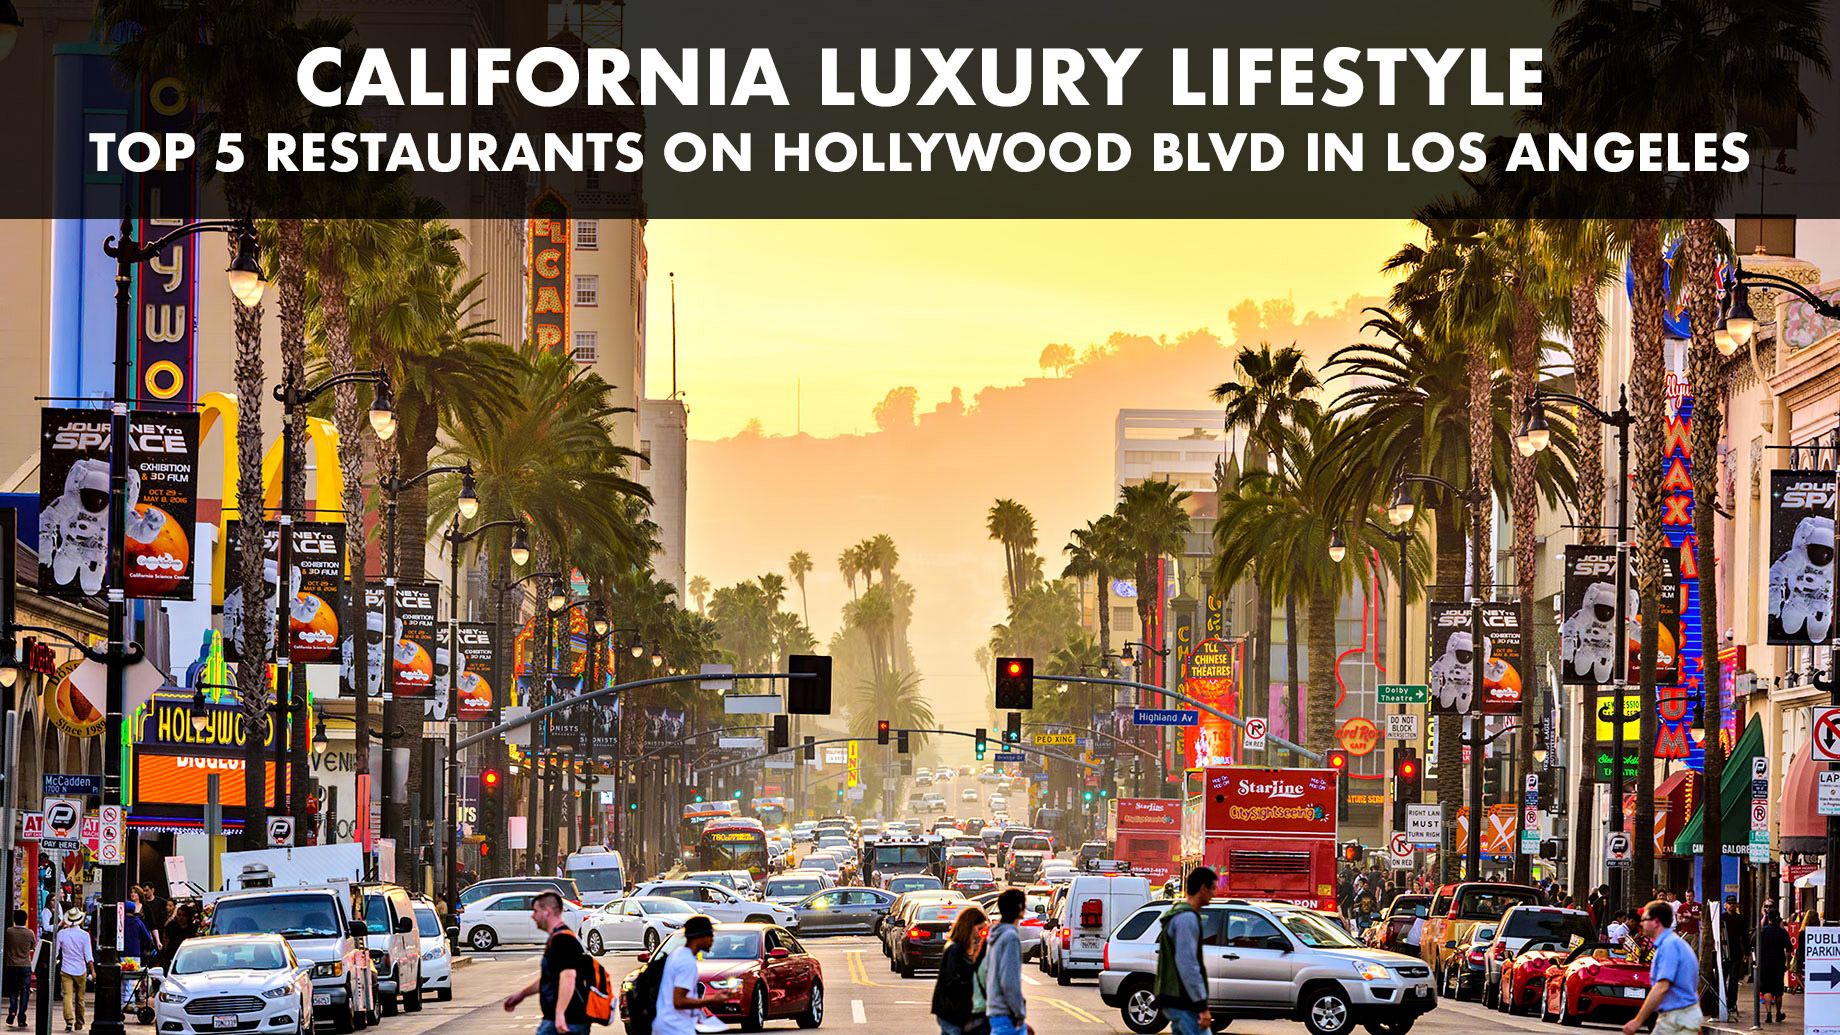 California Luxury Lifestyle – Top 5 Restaurants on Hollywood Blvd in Los Angeles